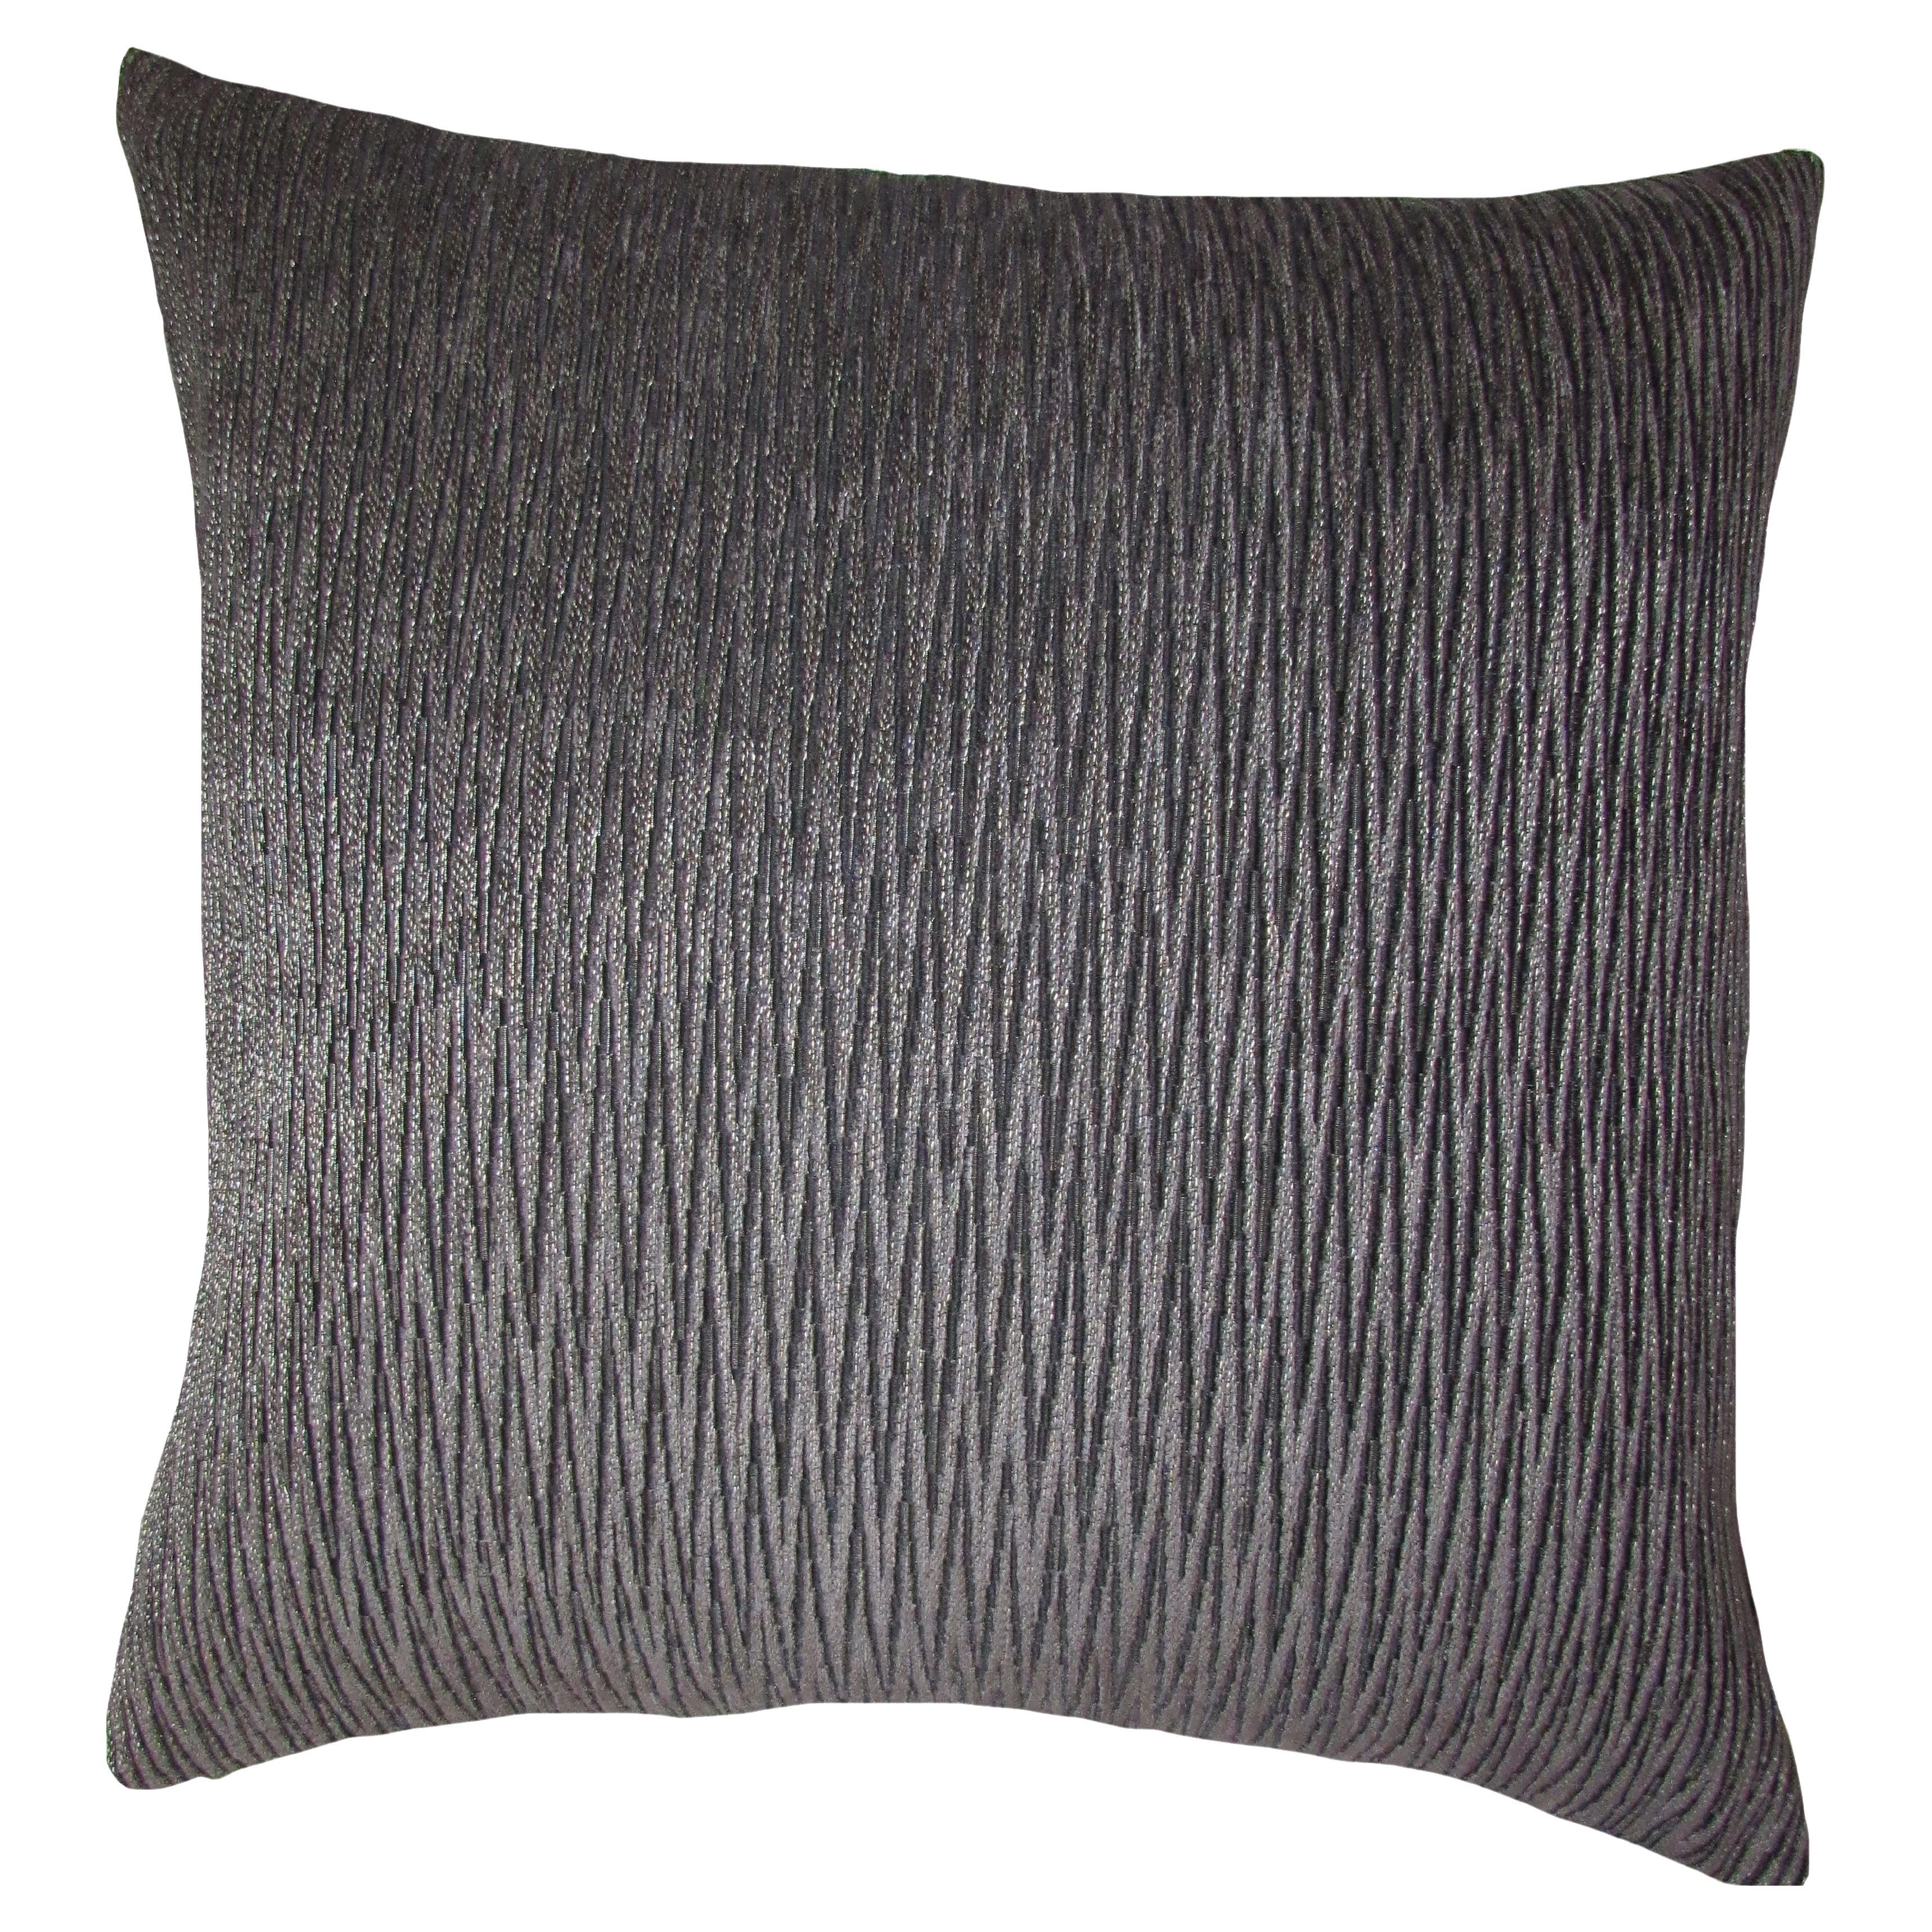 Chevron Charcoal- Black & Gray throw pillow in imported fabrics by Mar de Doce